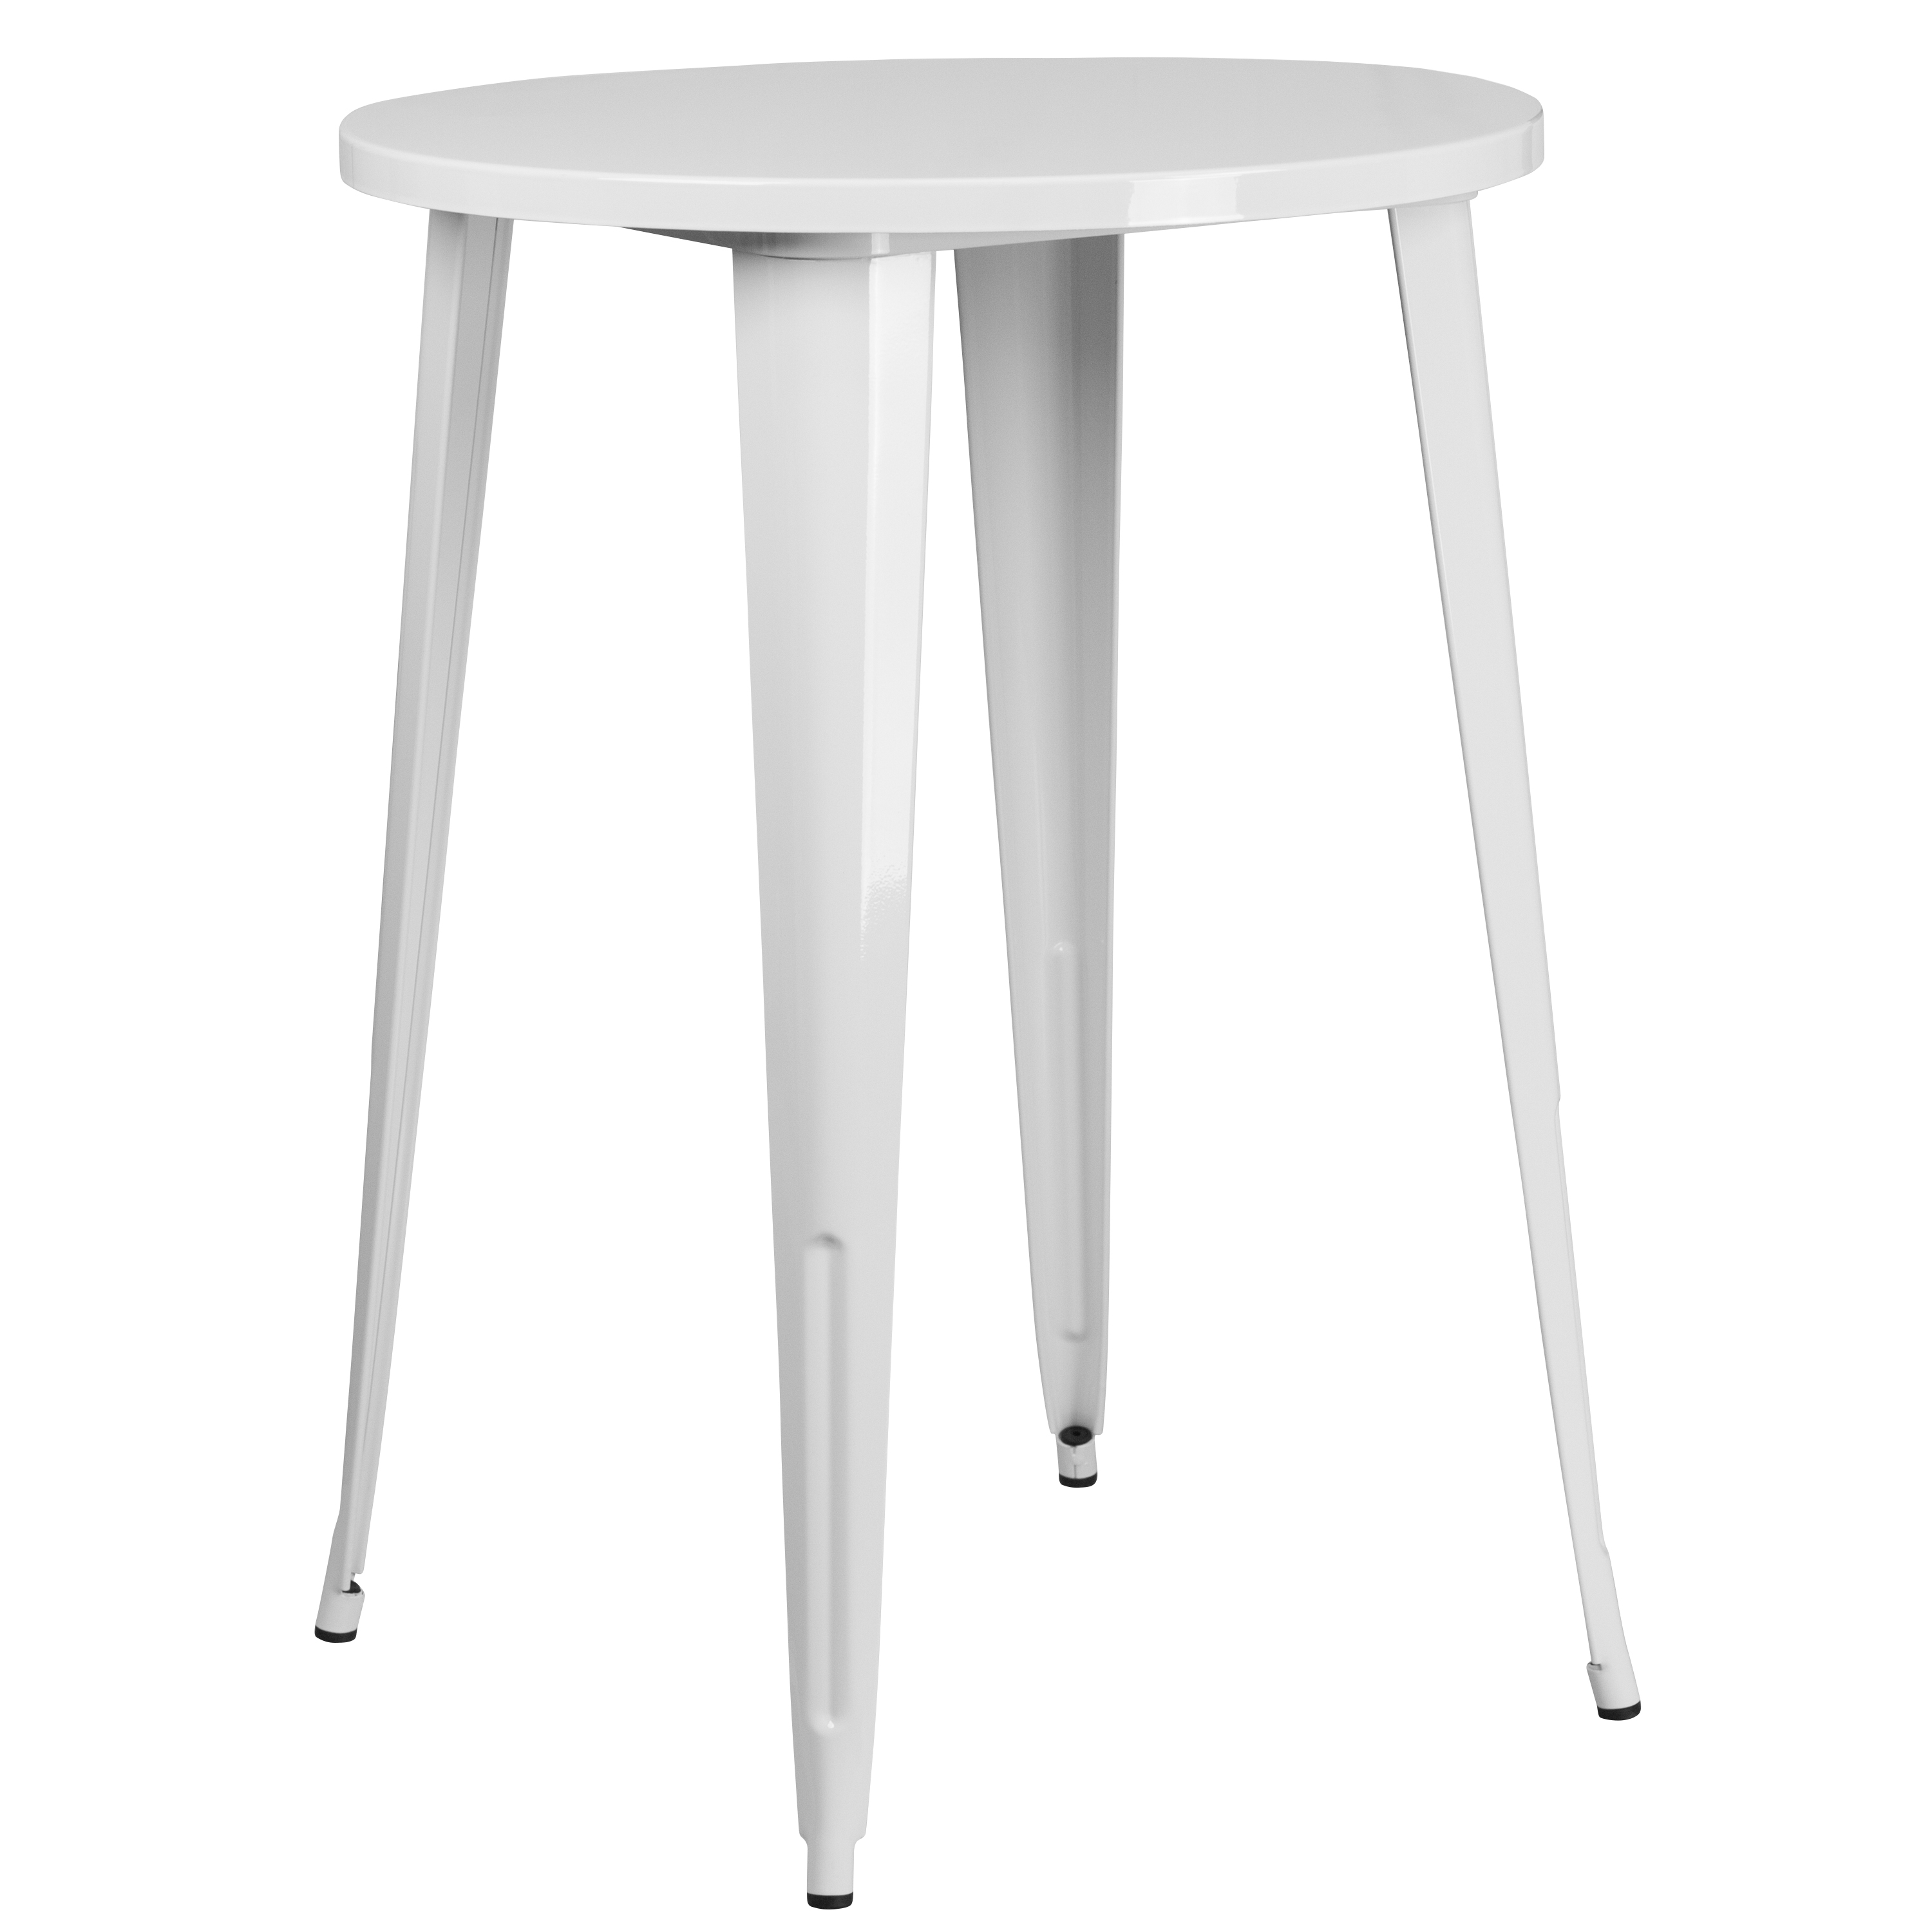 Flash Furniture Brad Commercial Grade 30" Round White Metal Indoor-Outdoor Bar Table Set with 2 Vertical Slat Back Stools - image 4 of 5